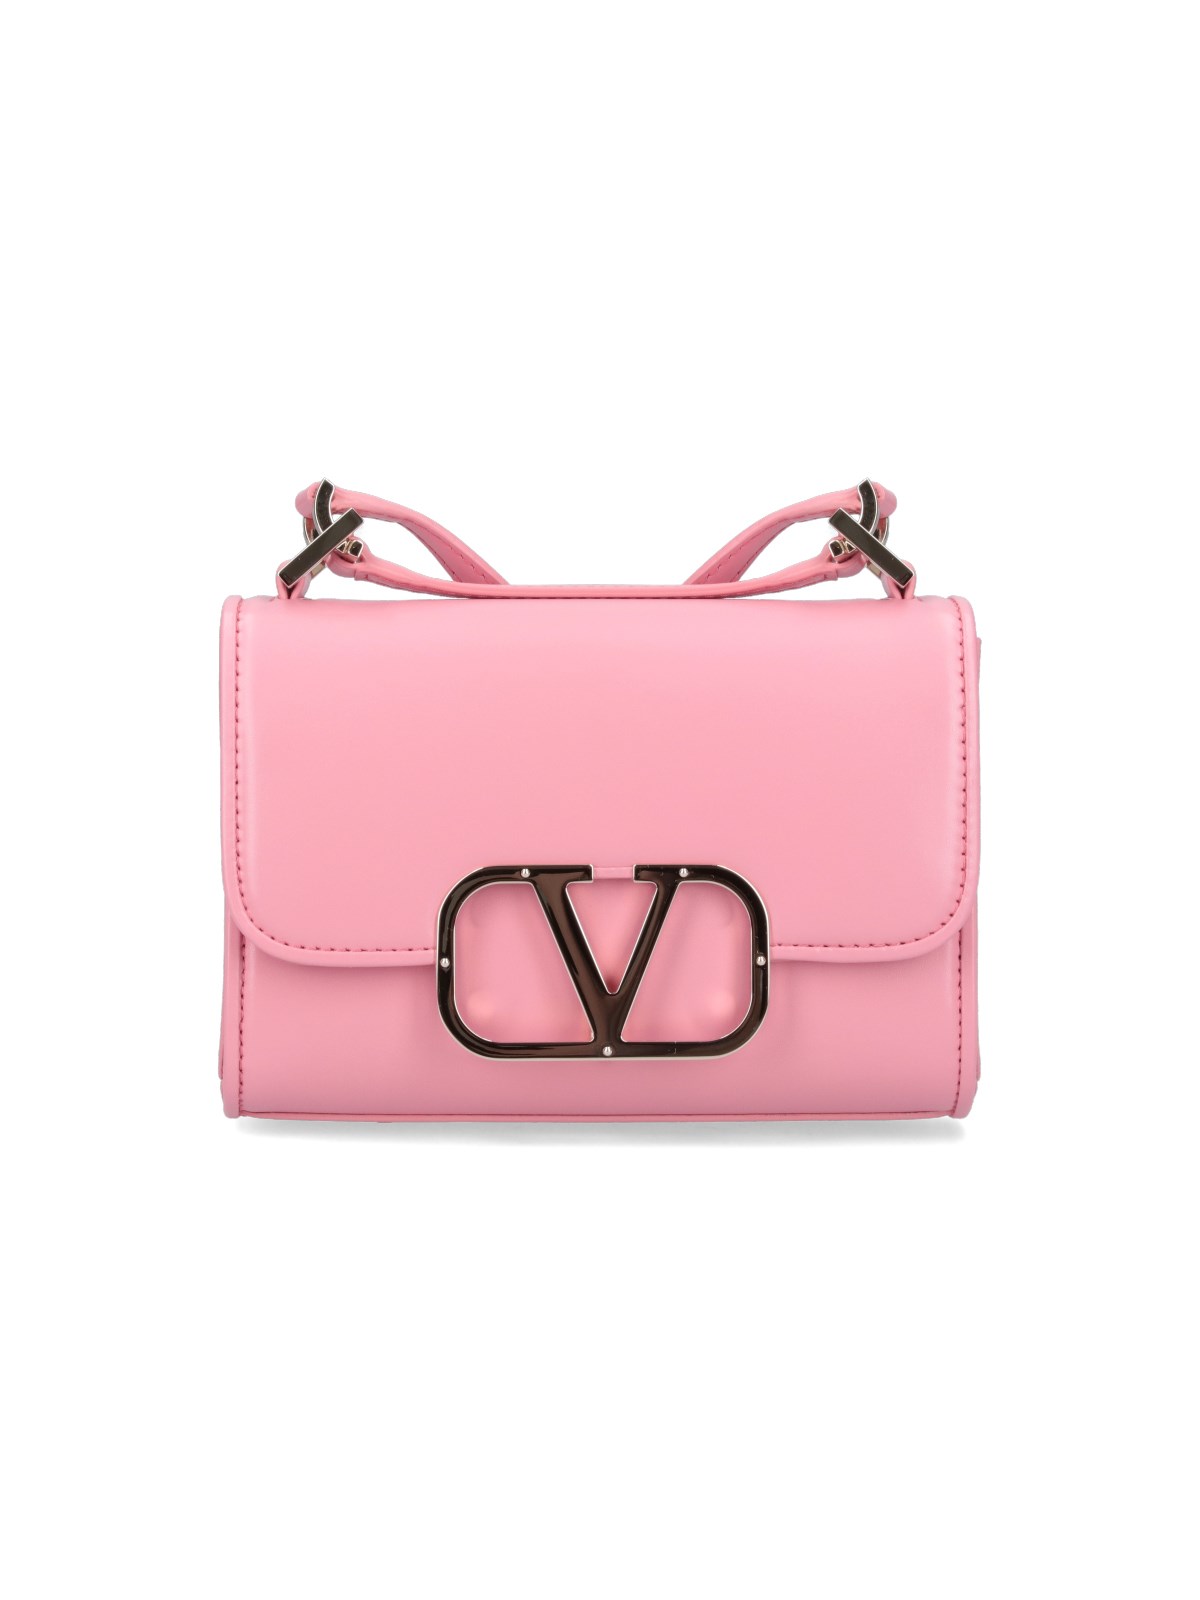 Valentino Garavani Women's Small Locò Shoulder Bag with Toile Iconographe Embroidery - Pink - Shoulder Bags